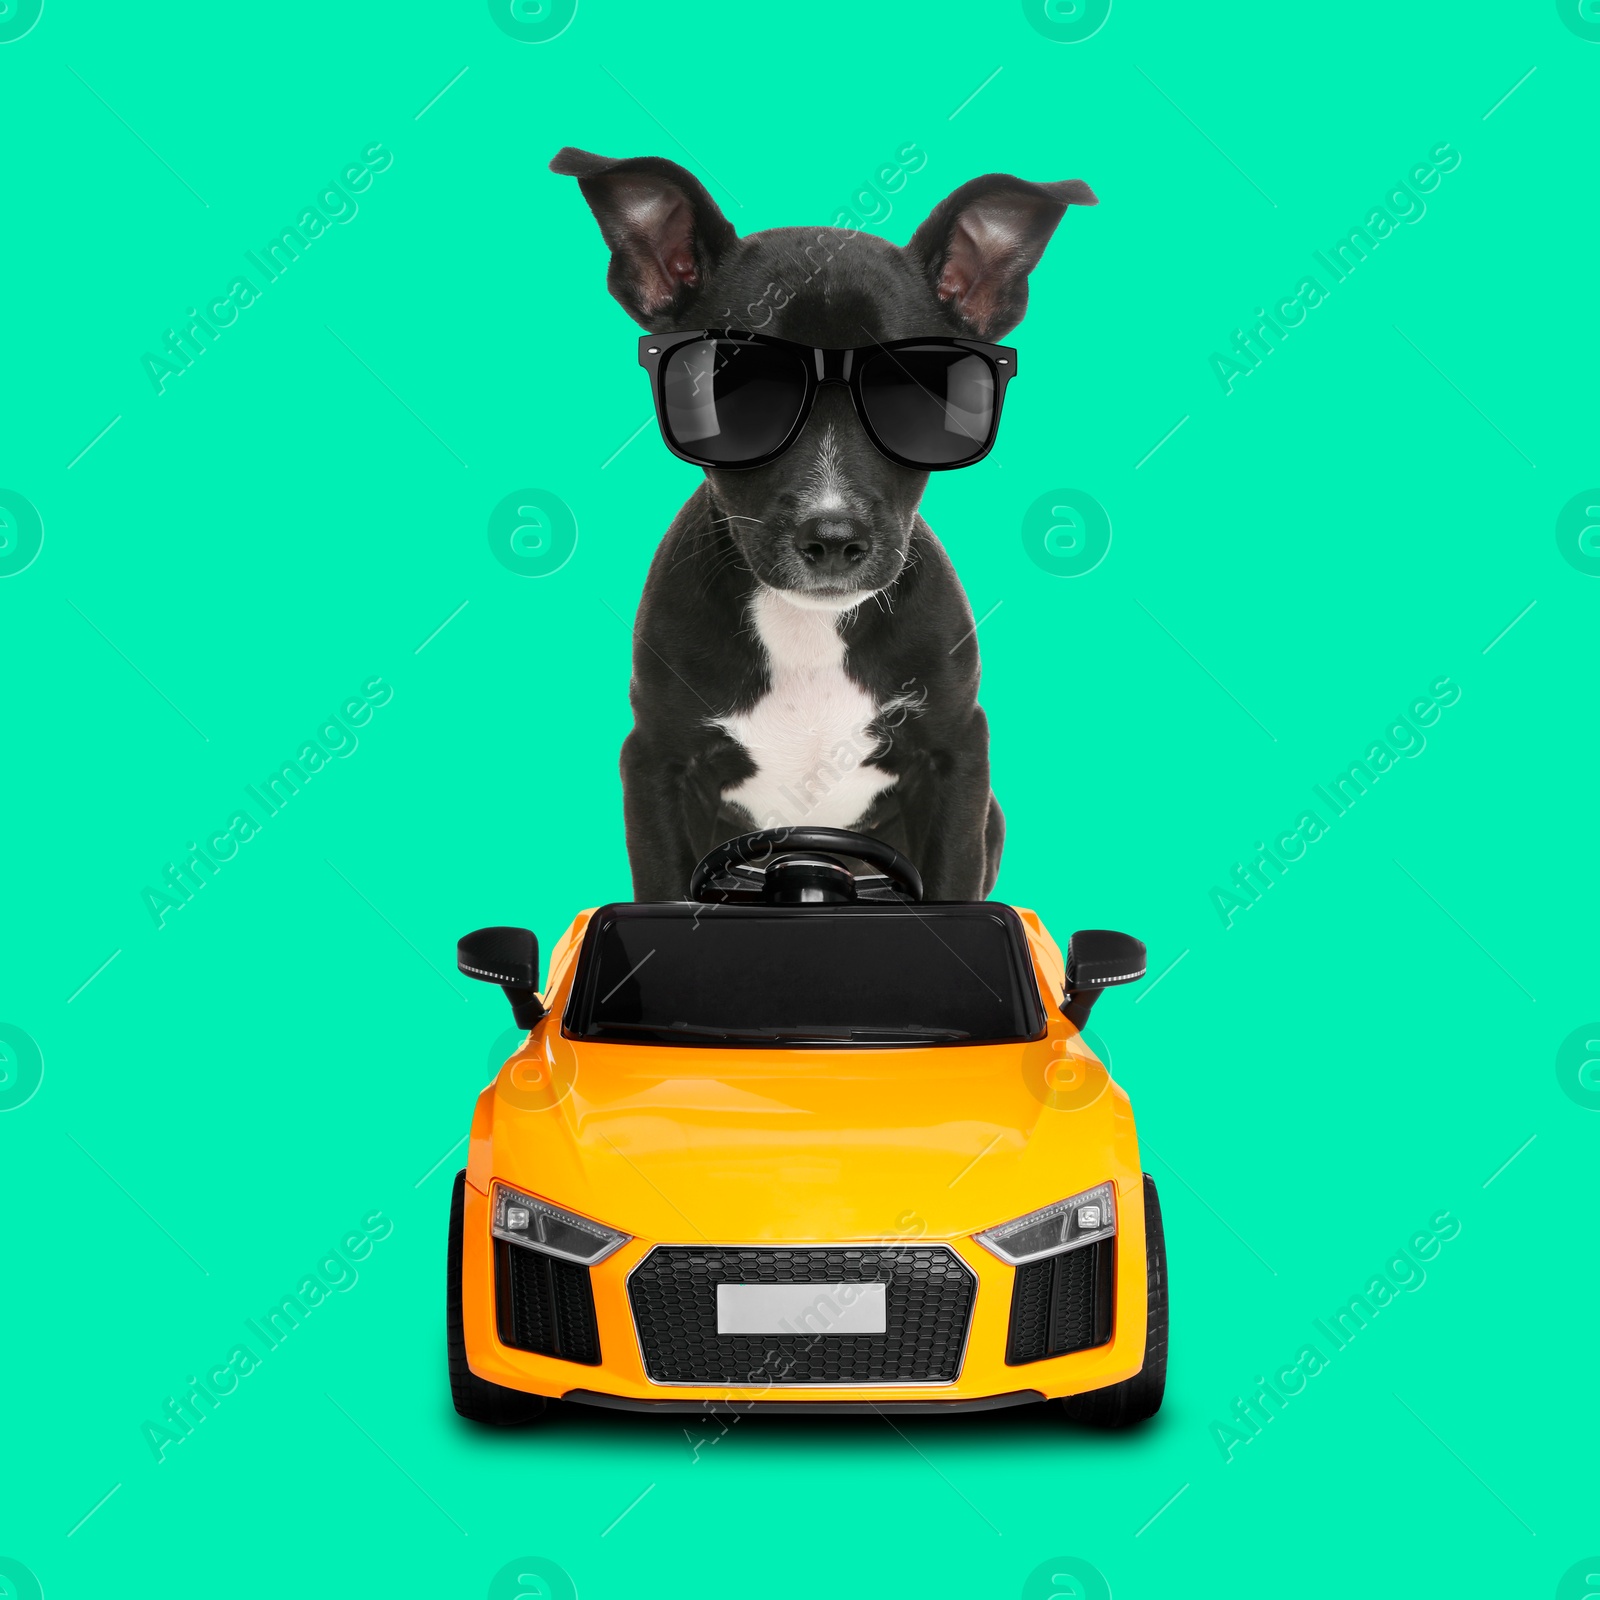 Image of Adorable puppy with stylish sunglasses in toy car on turquoise background